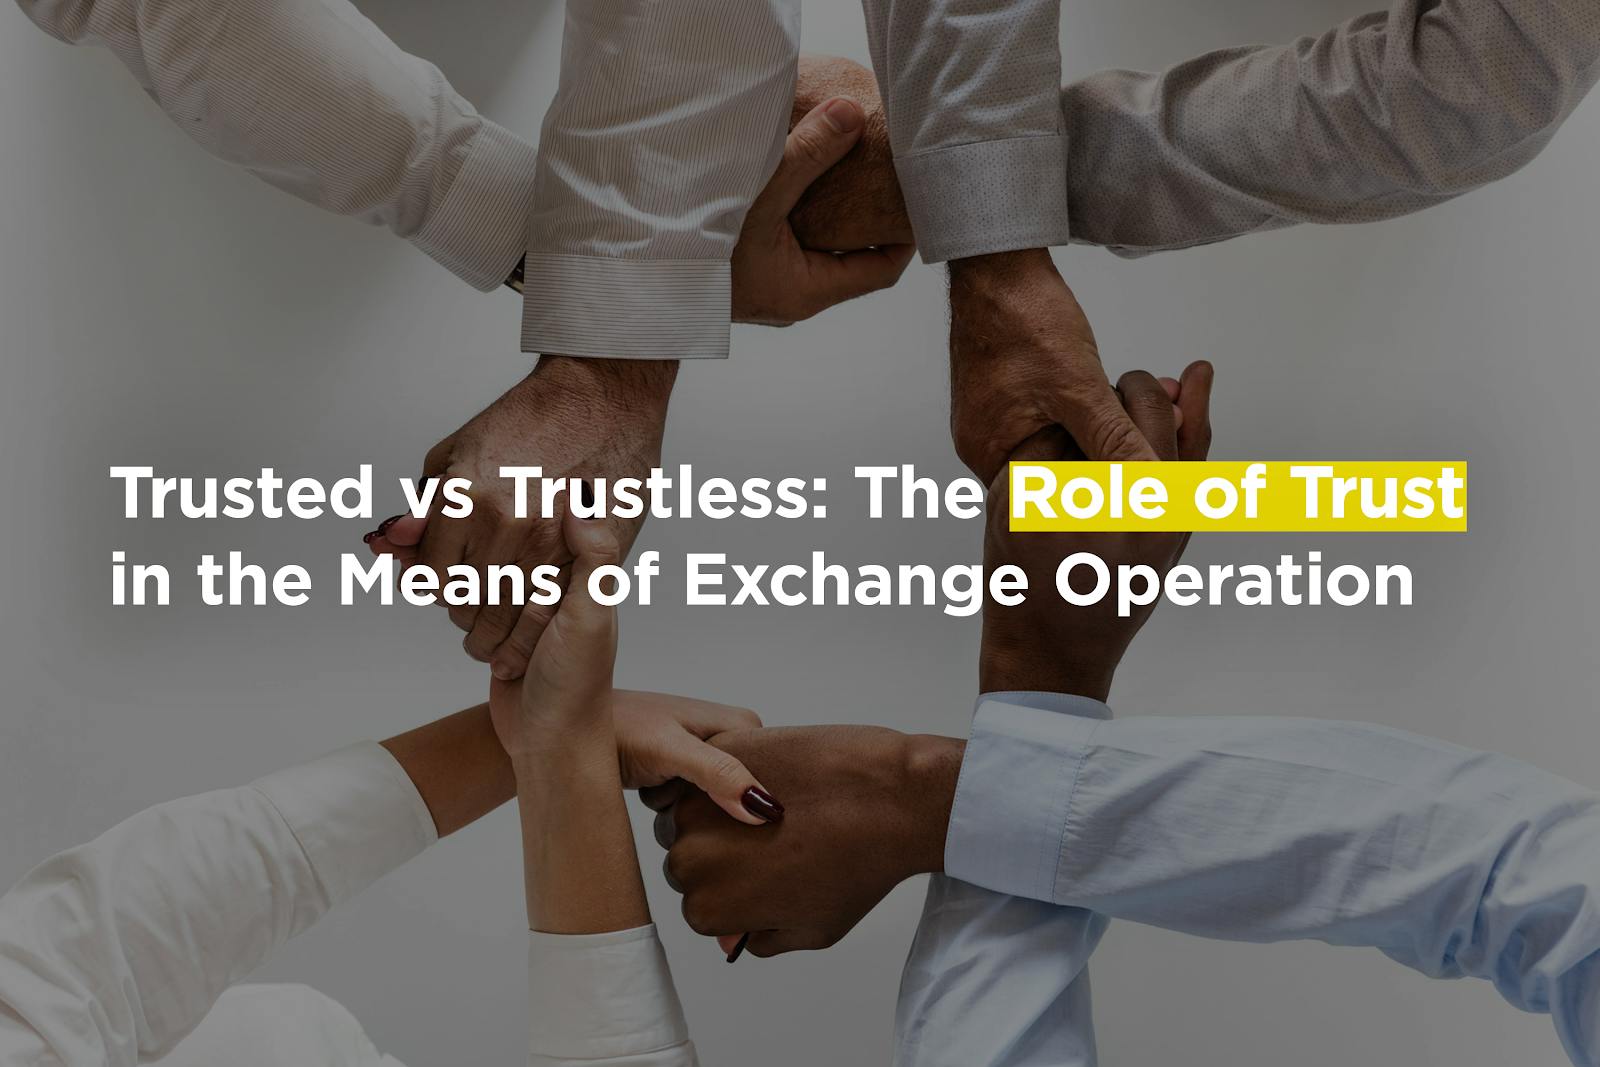 featured image - TRUSTED VS TRUSTLESS: THE ROLE OF TRUST IN THE MEANS OF EXCHANGE OPERATION